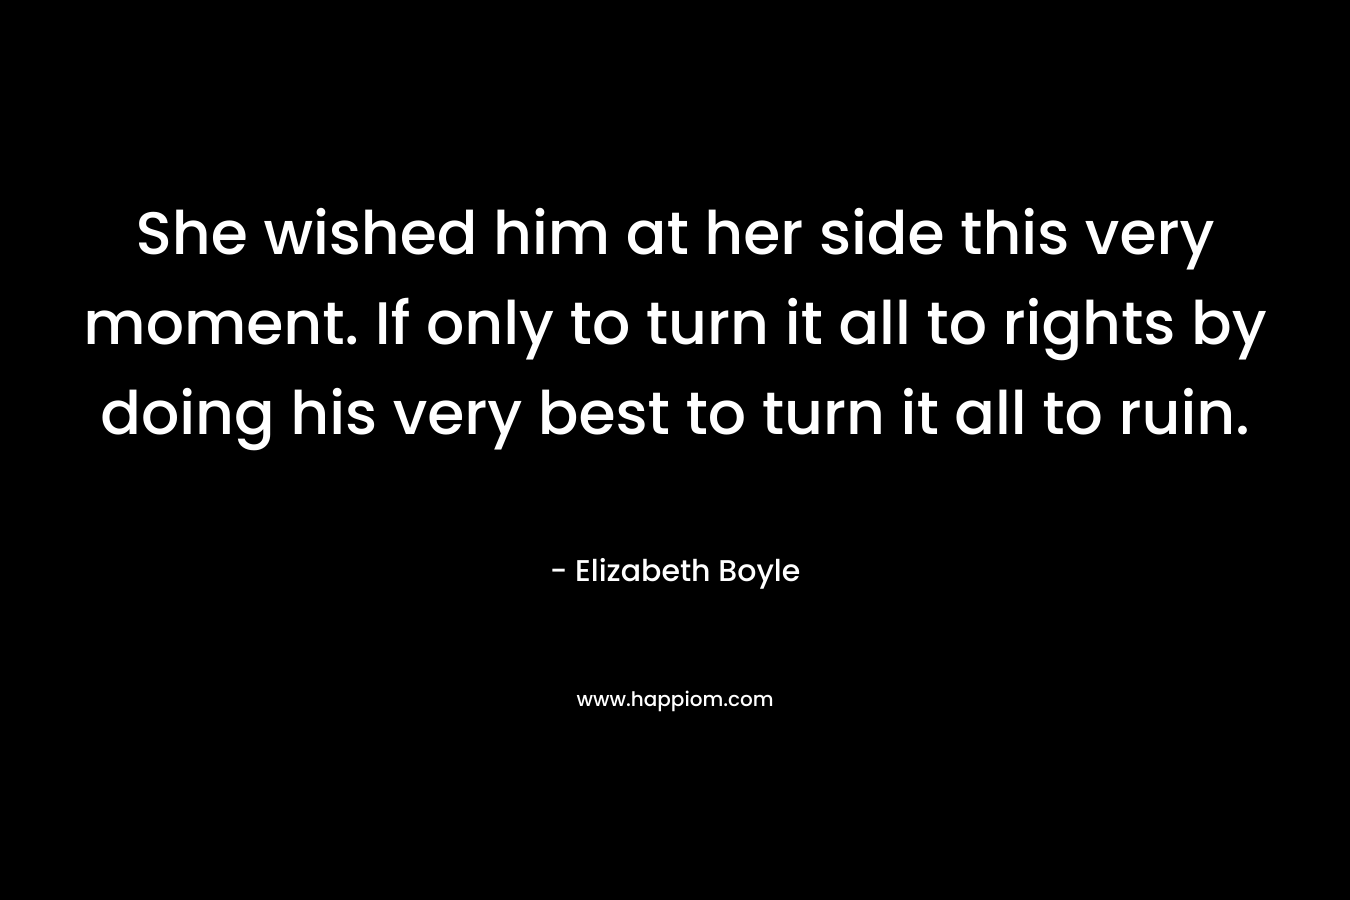 She wished him at her side this very moment. If only to turn it all to rights by doing his very best to turn it all to ruin. – Elizabeth Boyle